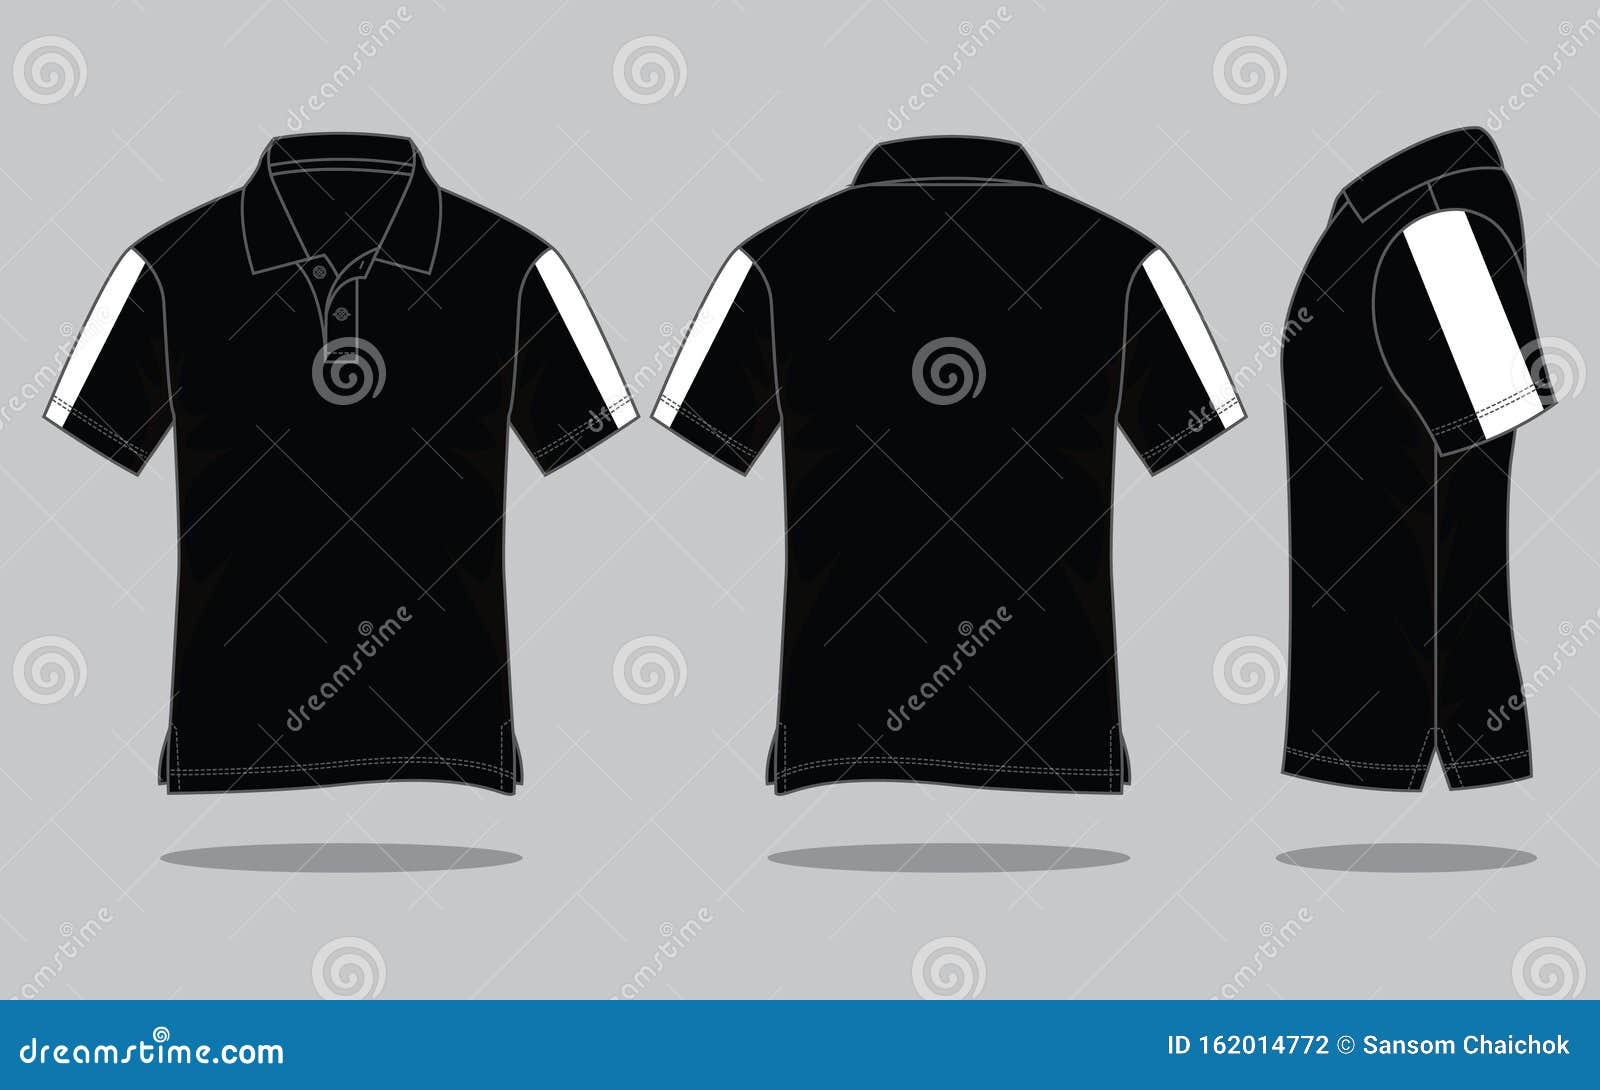 Polo Shirt Design Vector with Black/White Colors. Stock Illustration ...